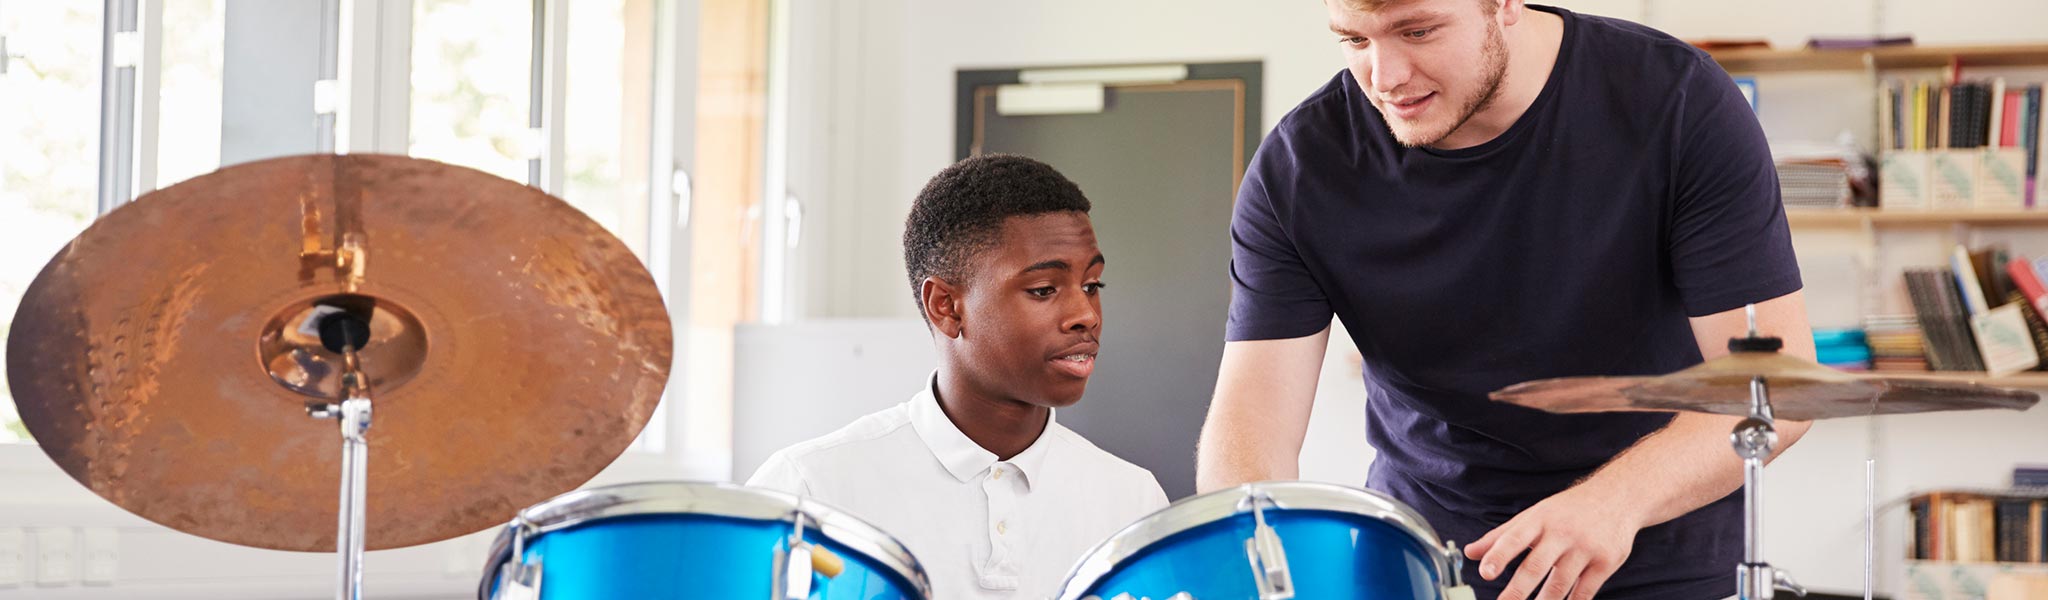 Male Pupil With Teacher Playing Drums In Music Lessonq